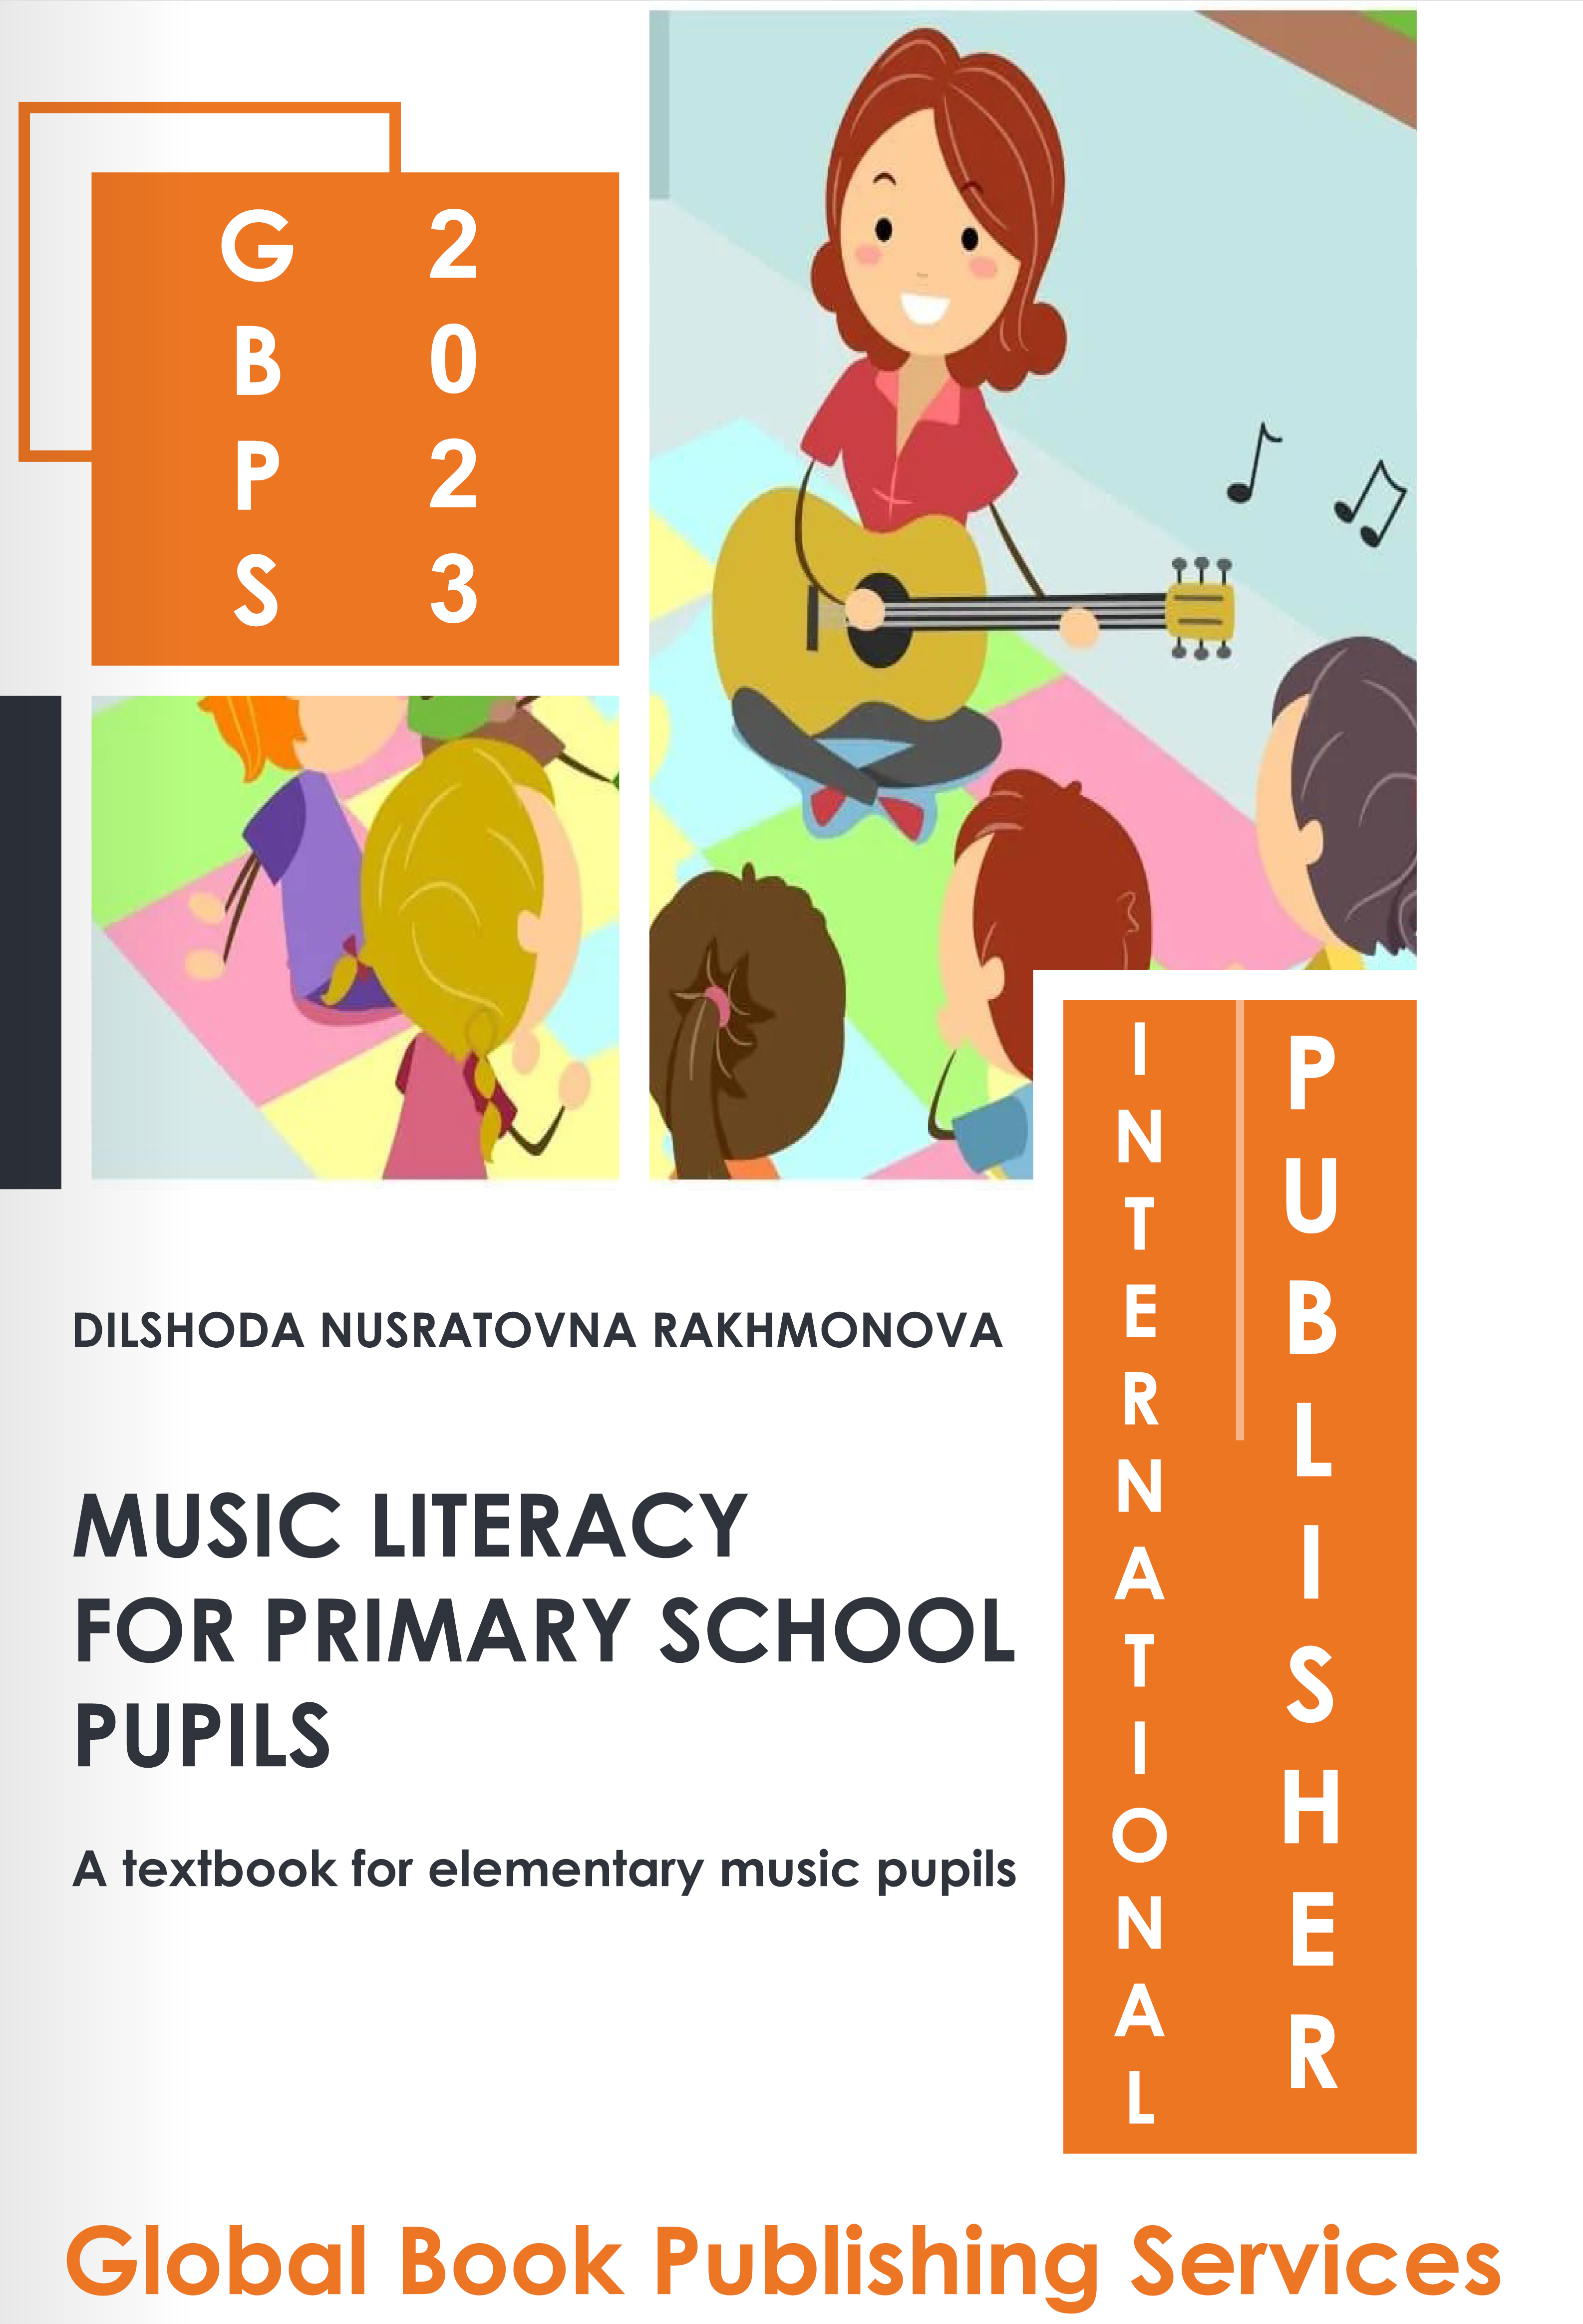 					View MUSIC LITERACY FOR PRIMARY SCHOOL PUPILS
				